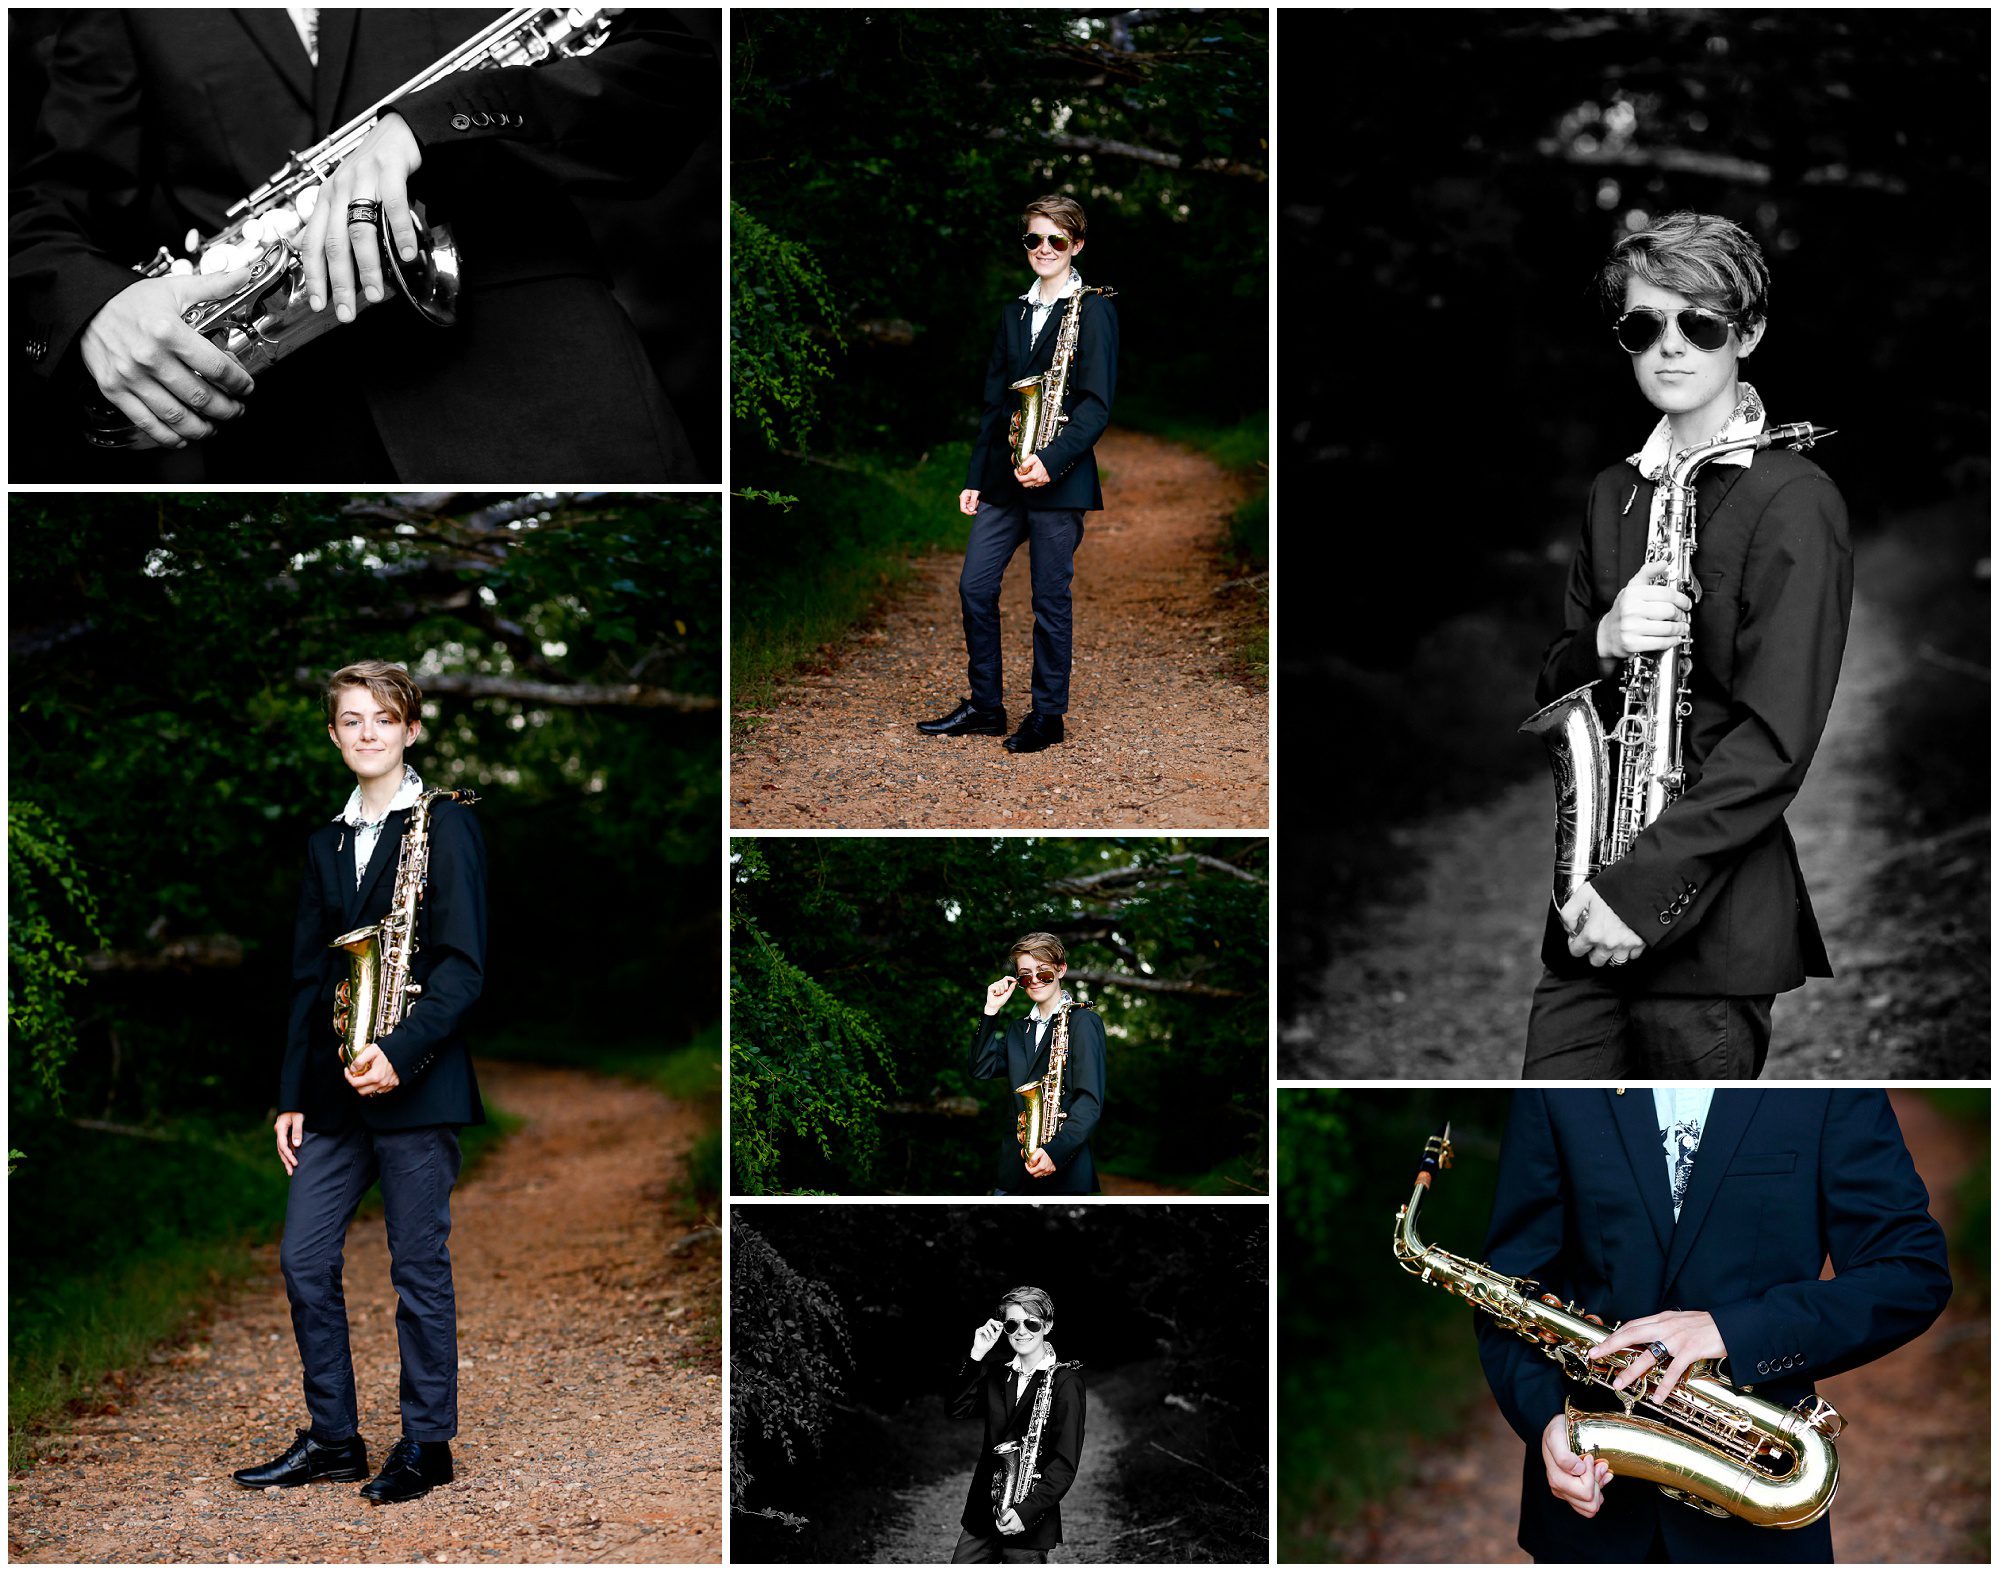 Lake Monticello Saxophone Player Senior Portraits in Fluvanna County photographer photography pictures photoshoot rural charlottesville